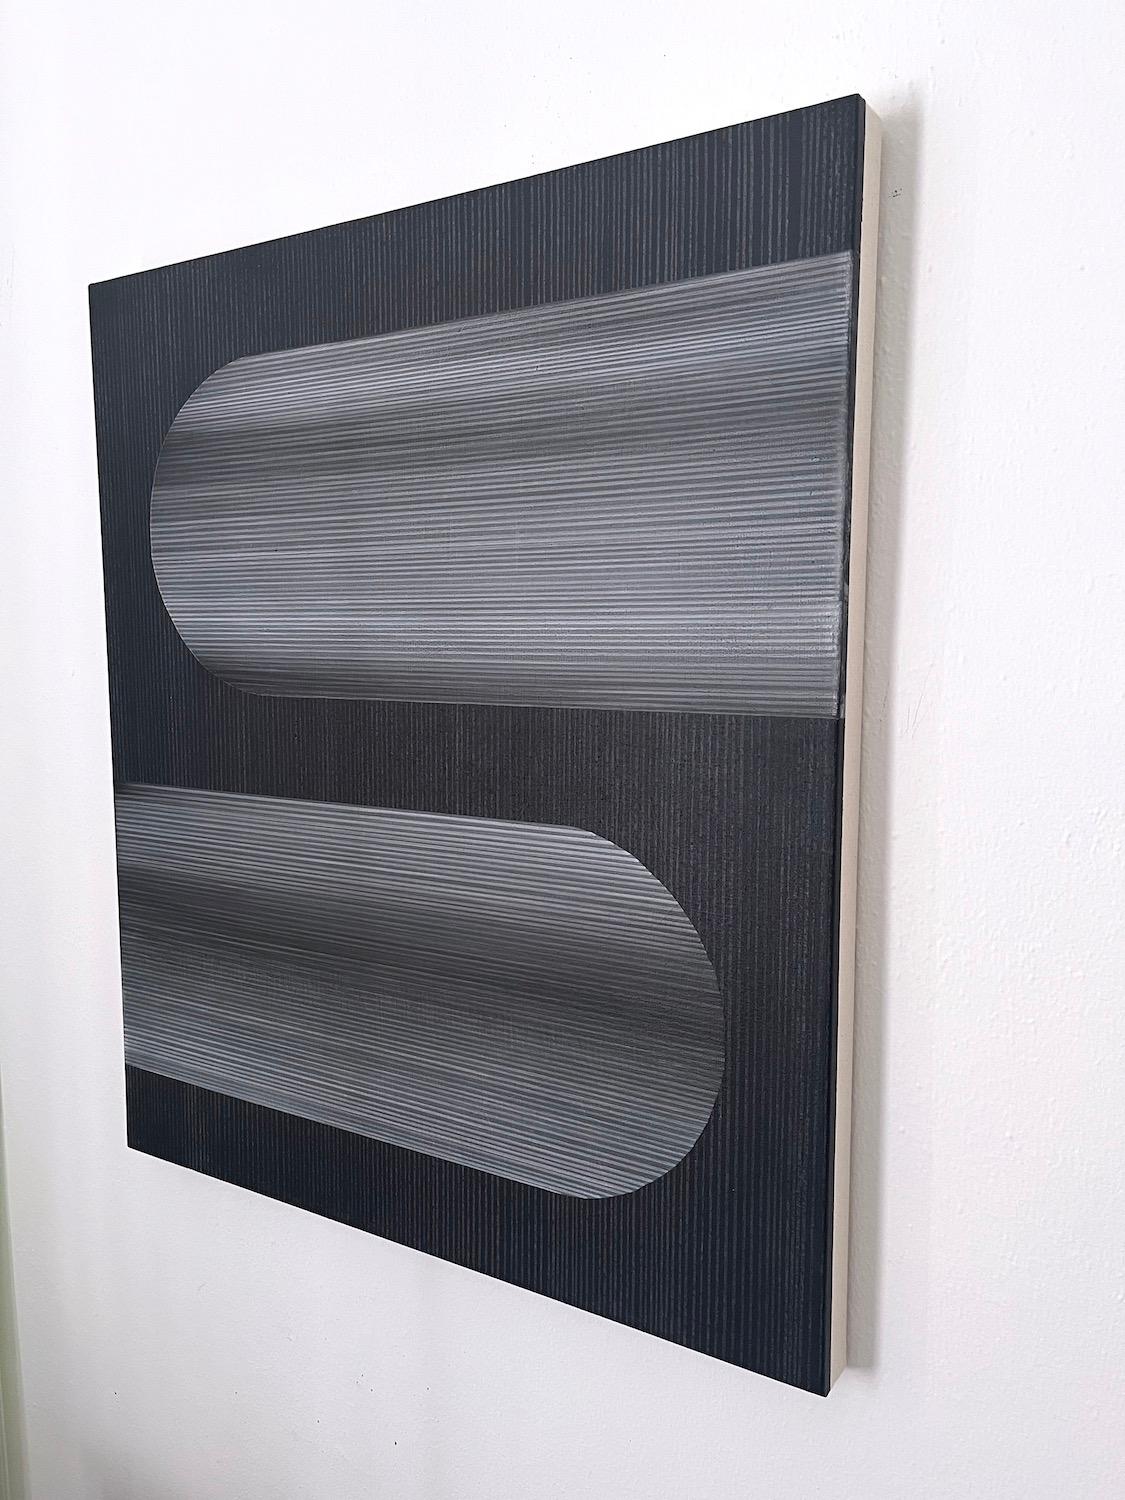 <p>Artist Comments<br />Artist Patrick Duffy presents an abstract dialogue between the imagination and the fundamentals of all things space. Geometric shapes develop through the minimal presentation of contrasting textures. He explores newly learned